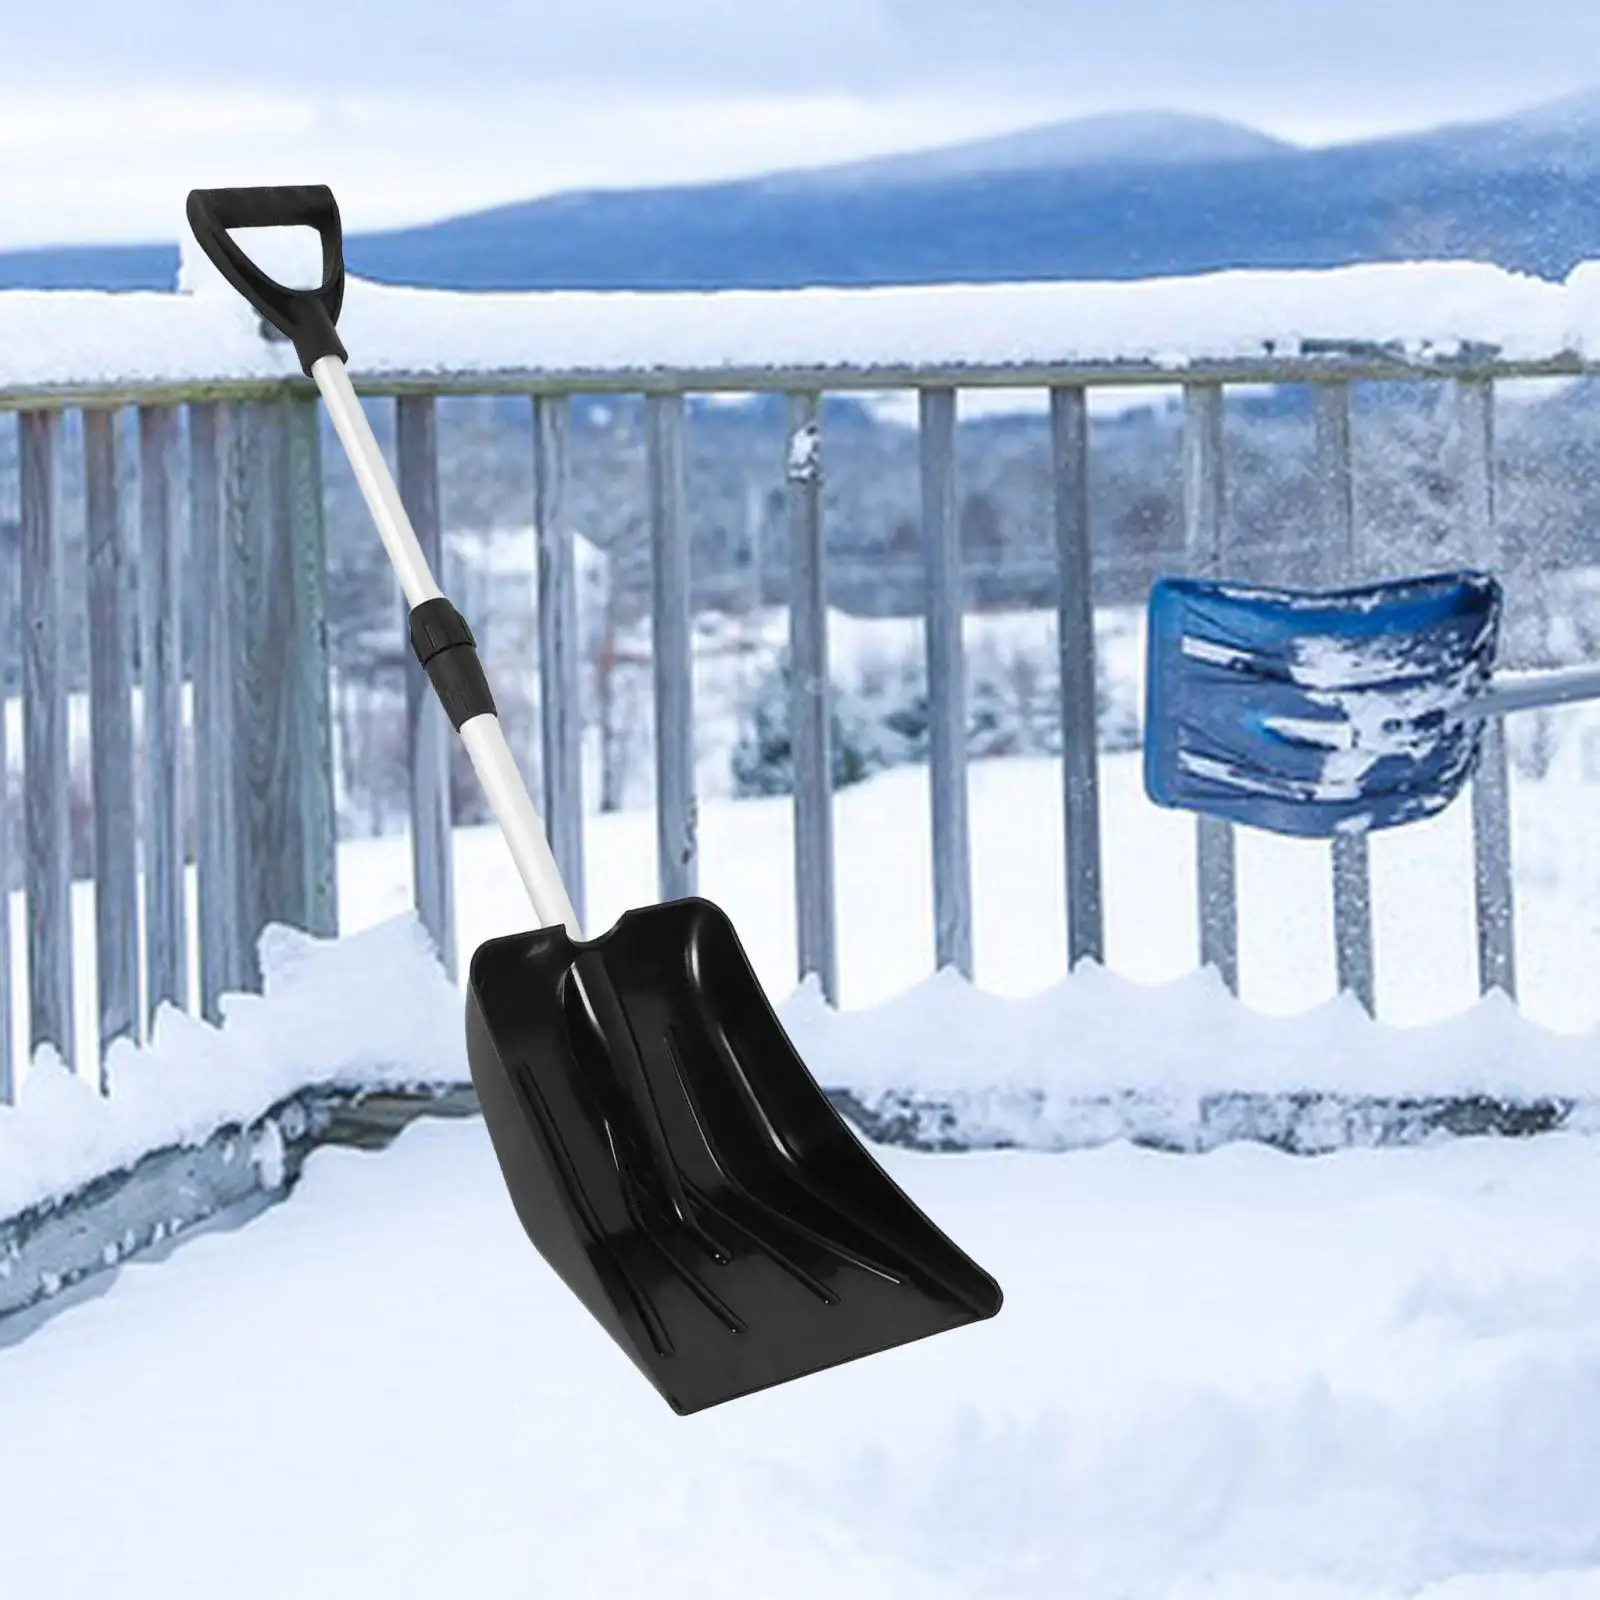 Telescopic Snow Shovel 70cm-90cm Portable Compact Adjustable Extendable Snow Removal Tool for SUV Truck Multifunctional Durable